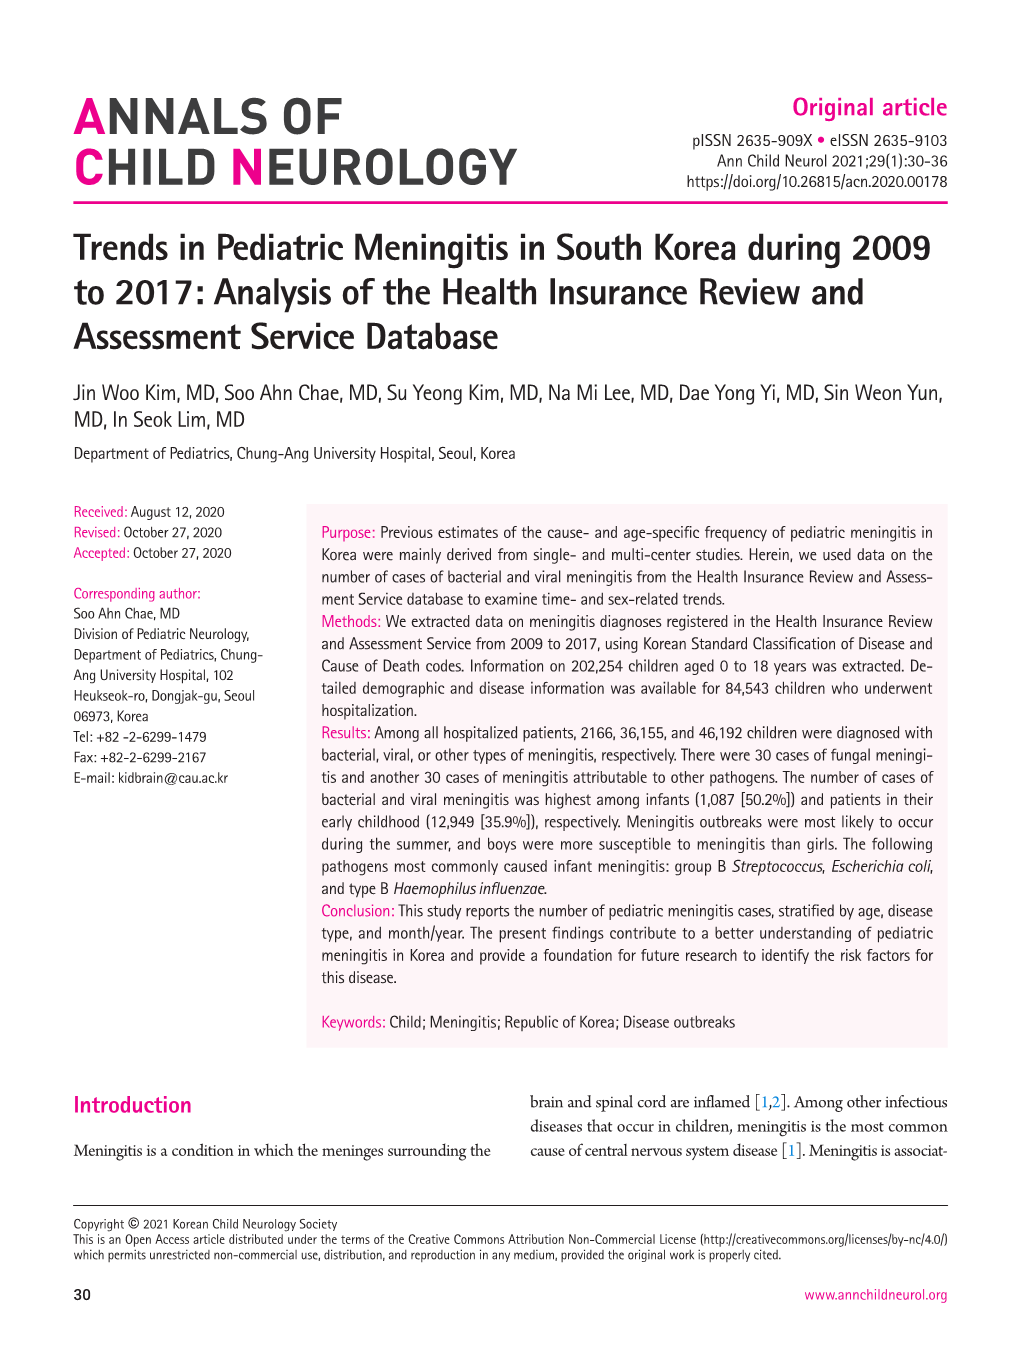 Trends in Pediatric Meningitis in South Korea During 2009 to 2017: Analysis of the Health Insurance Review and Assessment Service Database